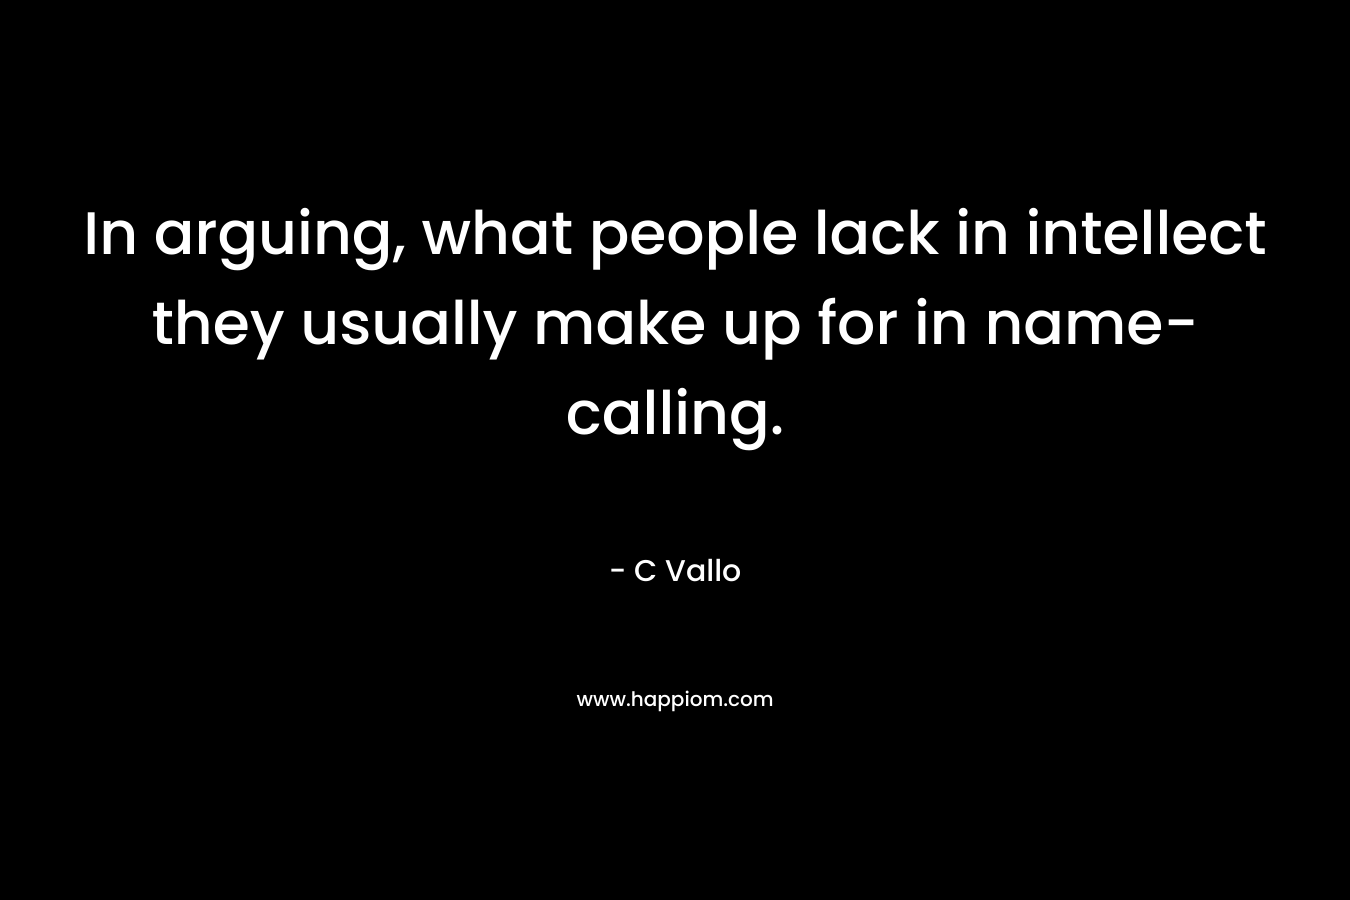 In arguing, what people lack in intellect they usually make up for in name-calling. – C Vallo